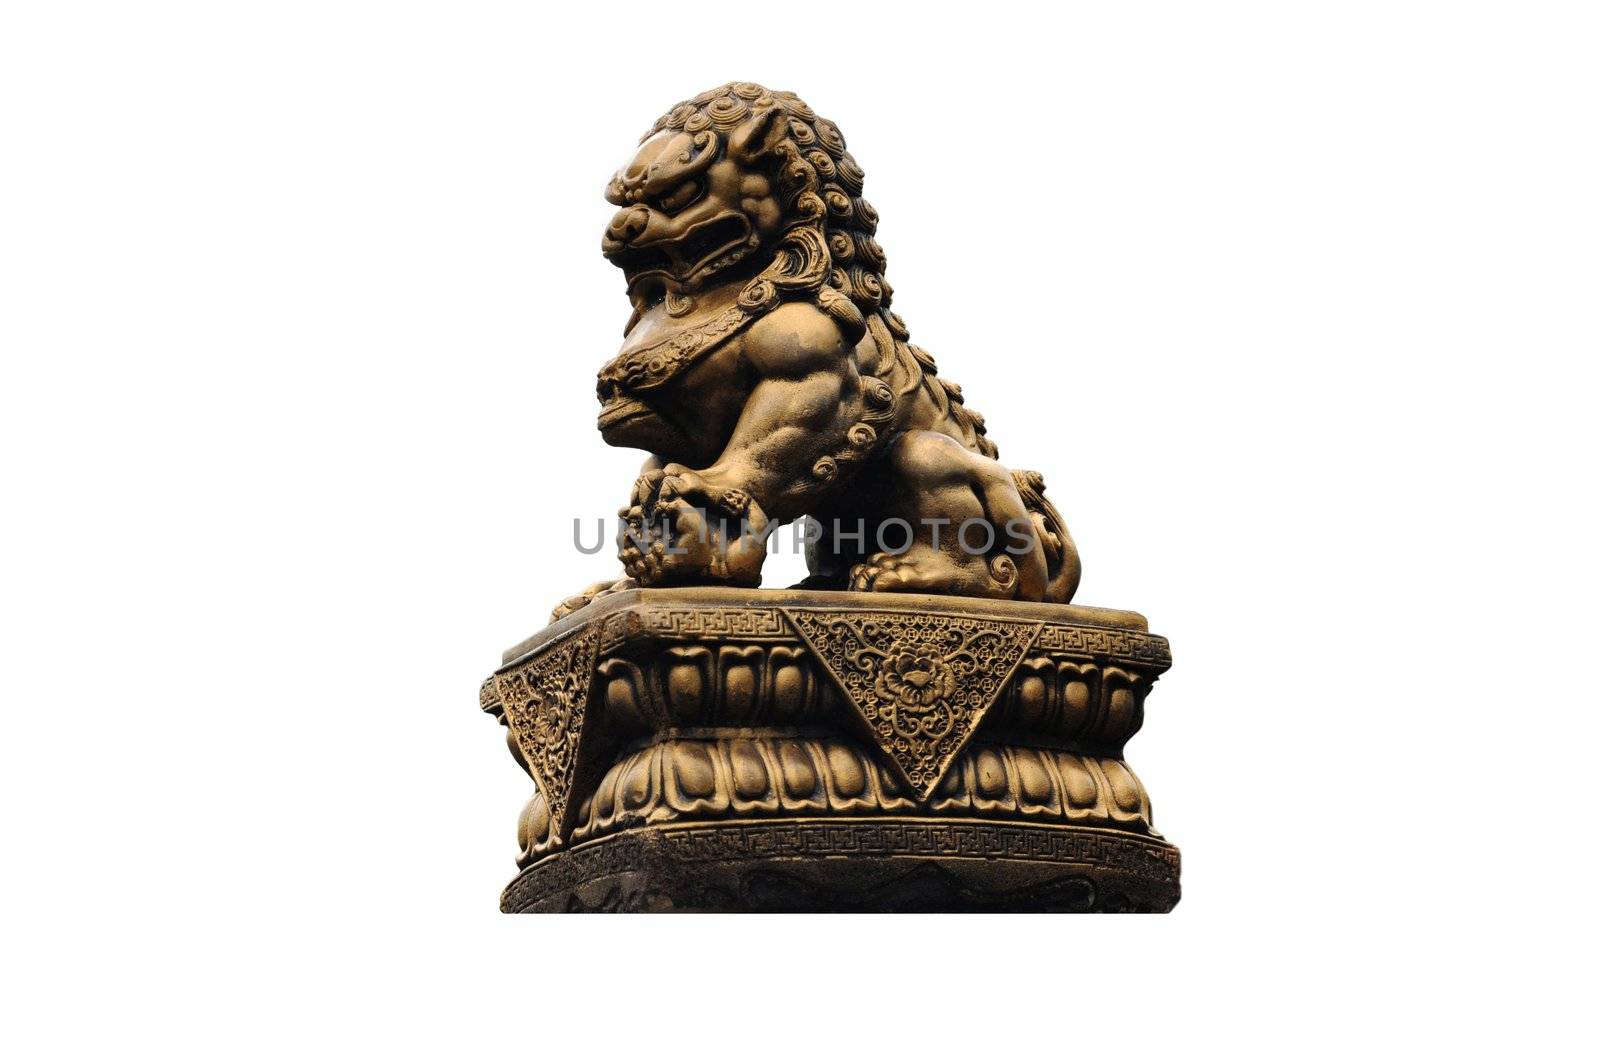 female chinese lion statue by MaZiKab